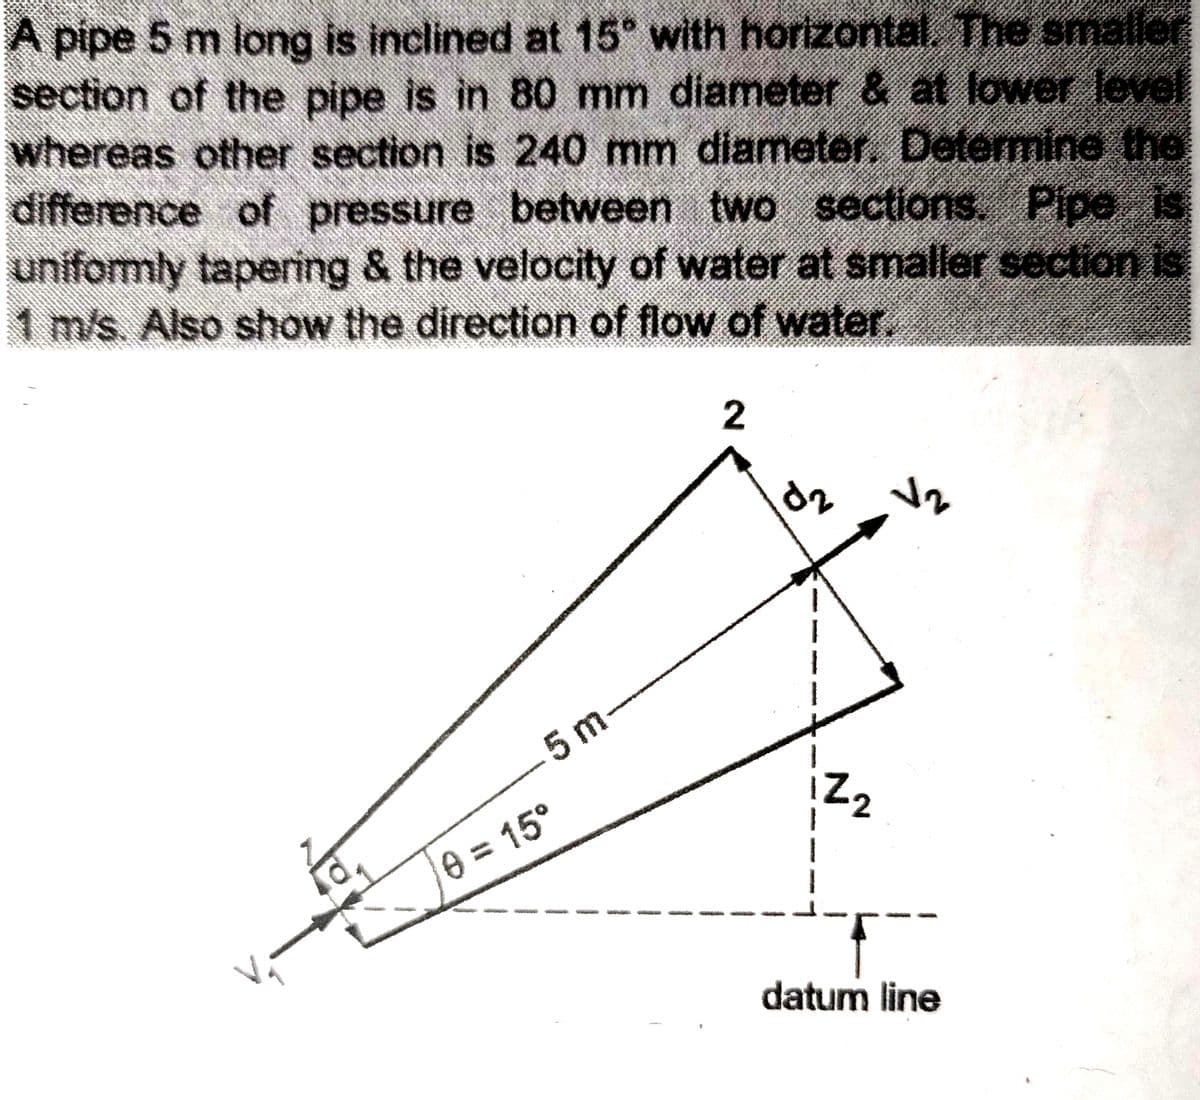 A pipe 5 m long is inclined at 15° with horizontal.The smaller
section of the pipe is in 80 mm diameter & at lower level
whereas other section is 240 mm diameter. Determine the
difference of pressure between two sections. Pipe is
uniformly tapering & the velocity of water at smaller section is
1 m/s. Also show the direction of flow of water.
5 m
0 = 15°
datum line
2.
